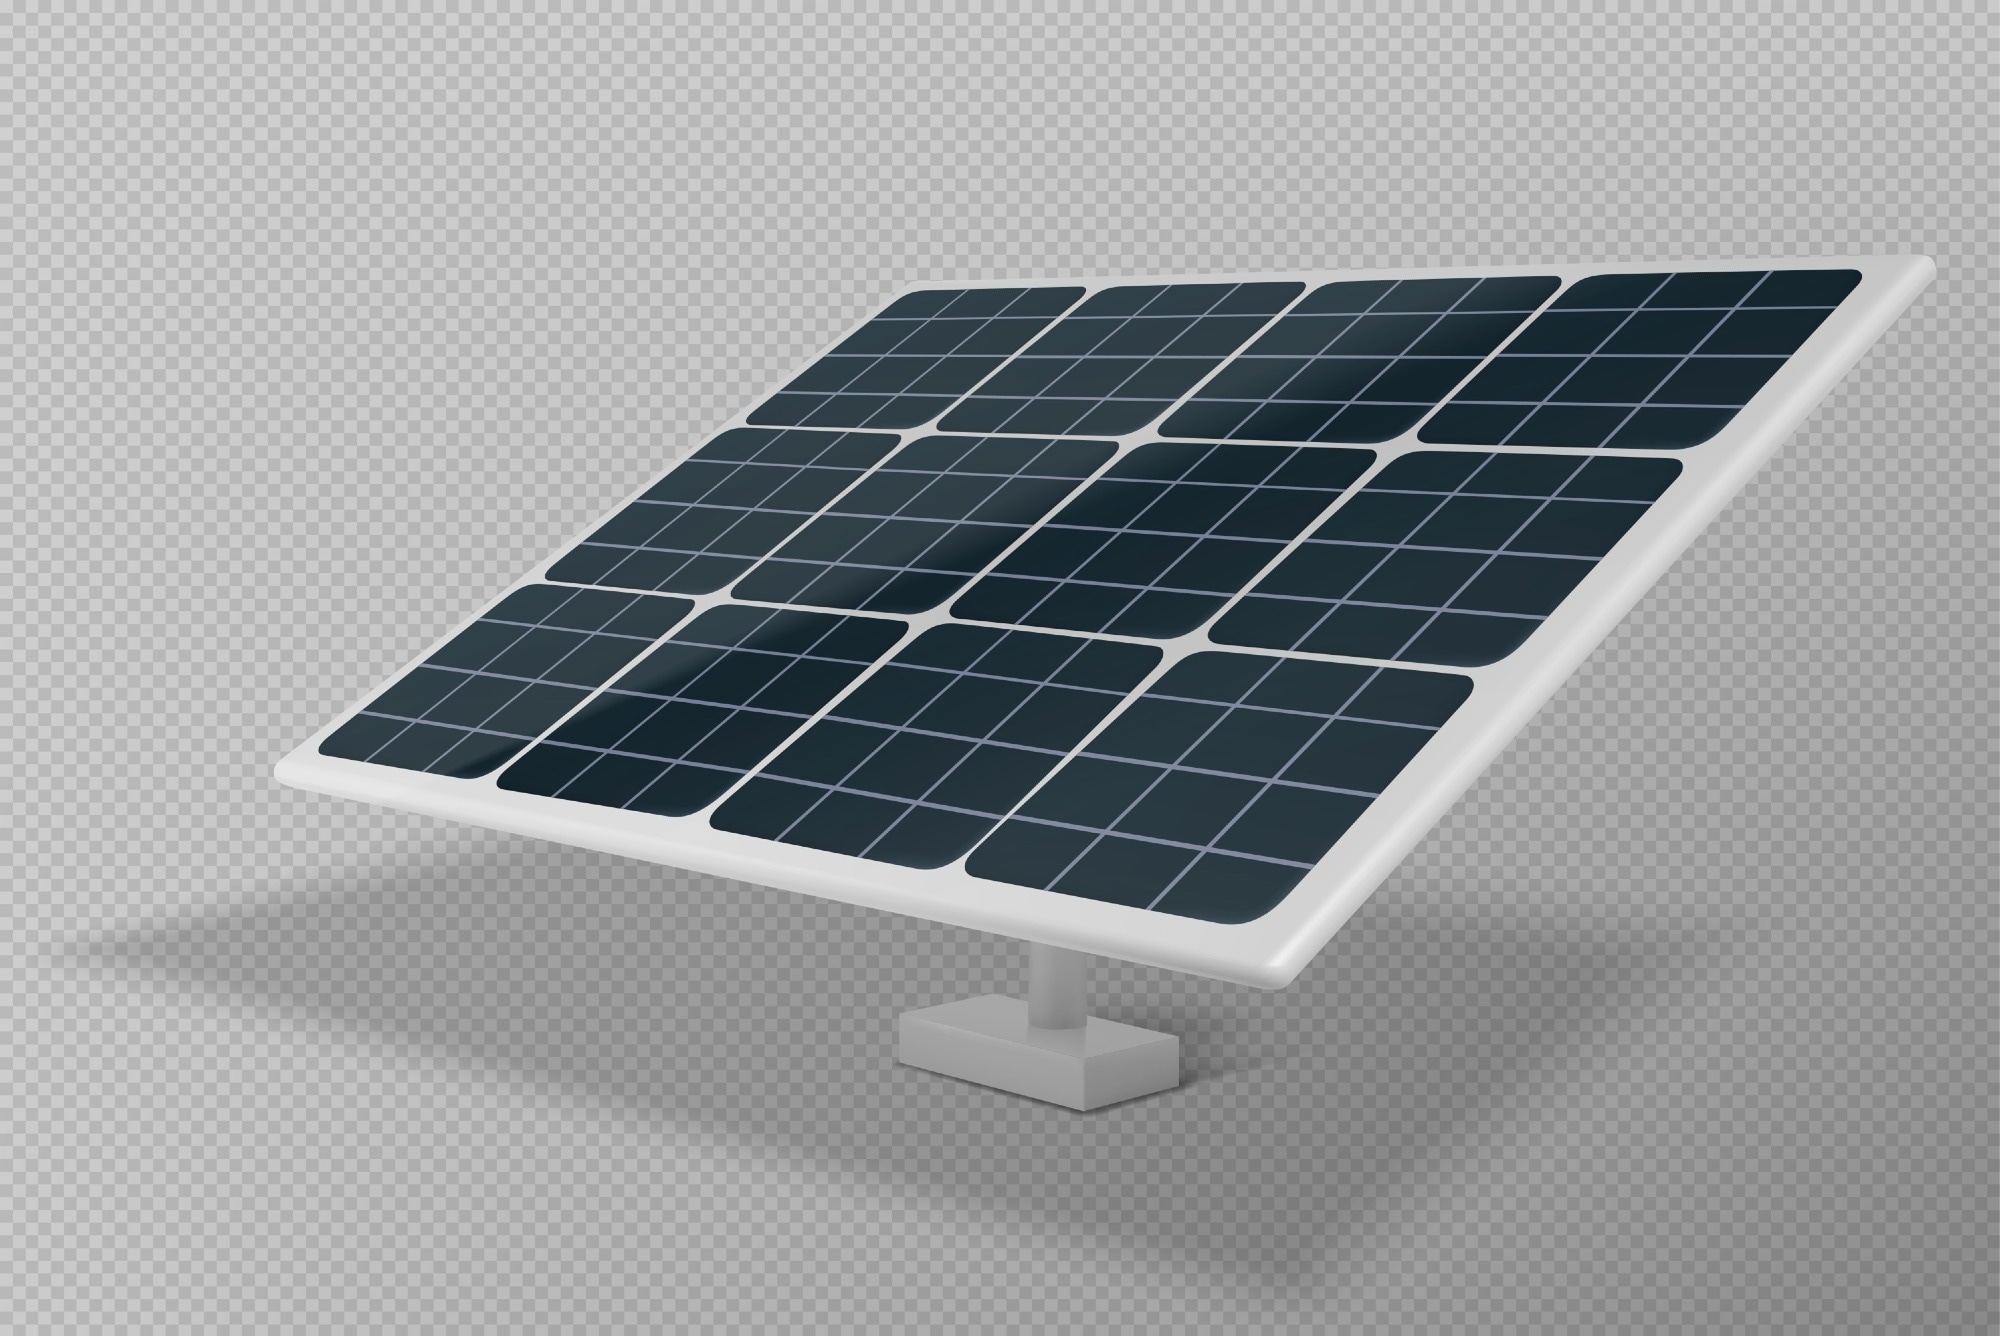 Realistic 3D photovoltaic module isolated on transparent background.